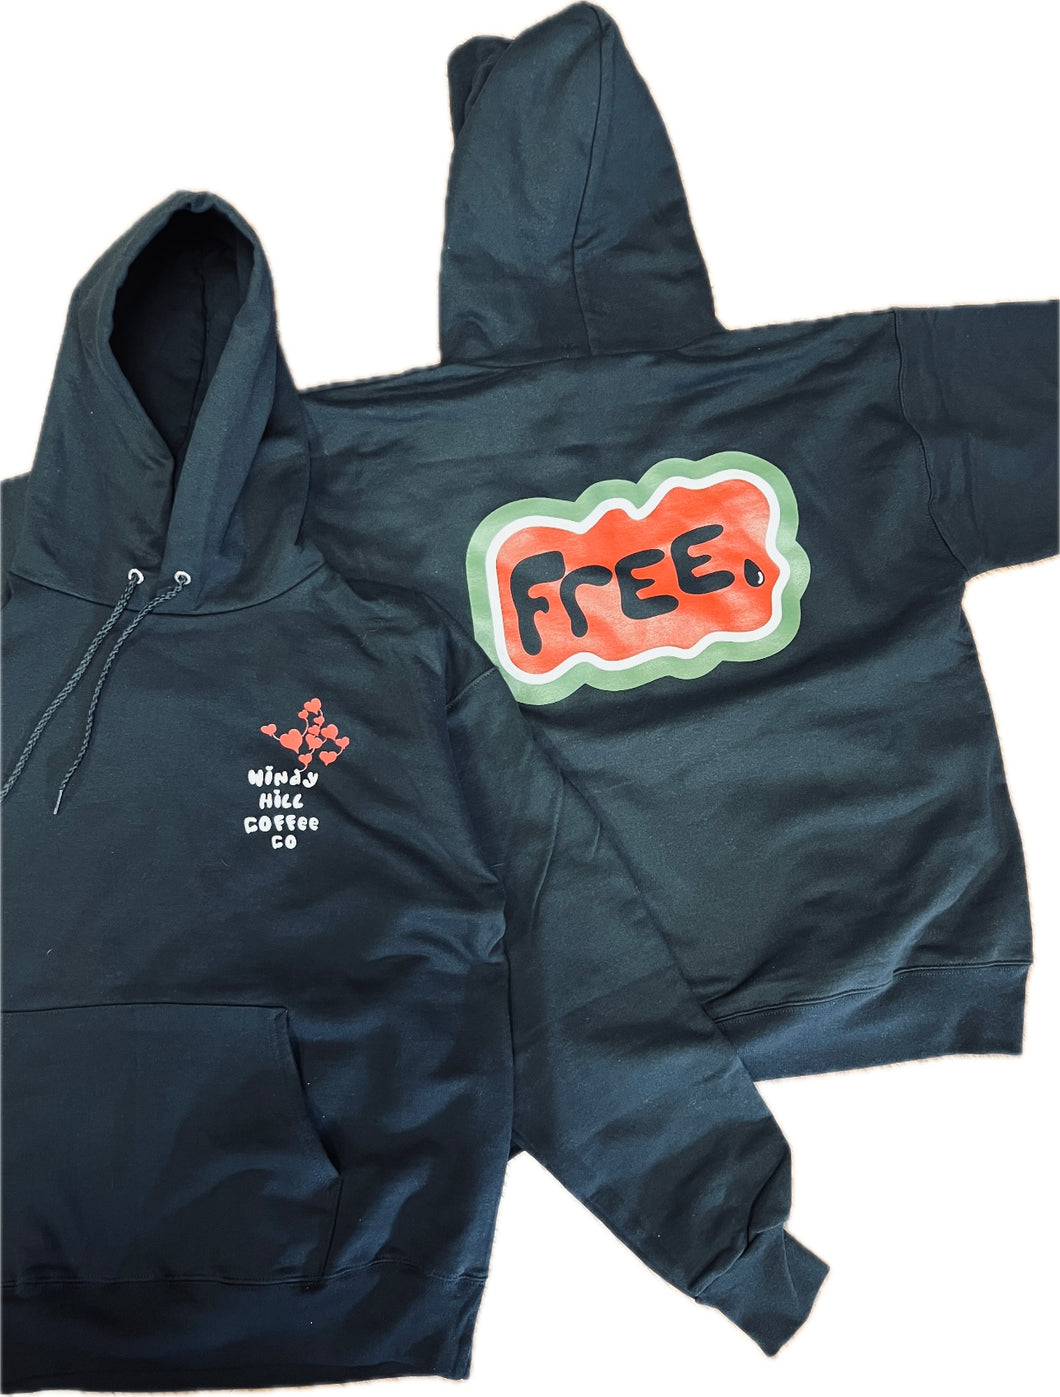 'Free' Hoodie - All Profits go to PCRF